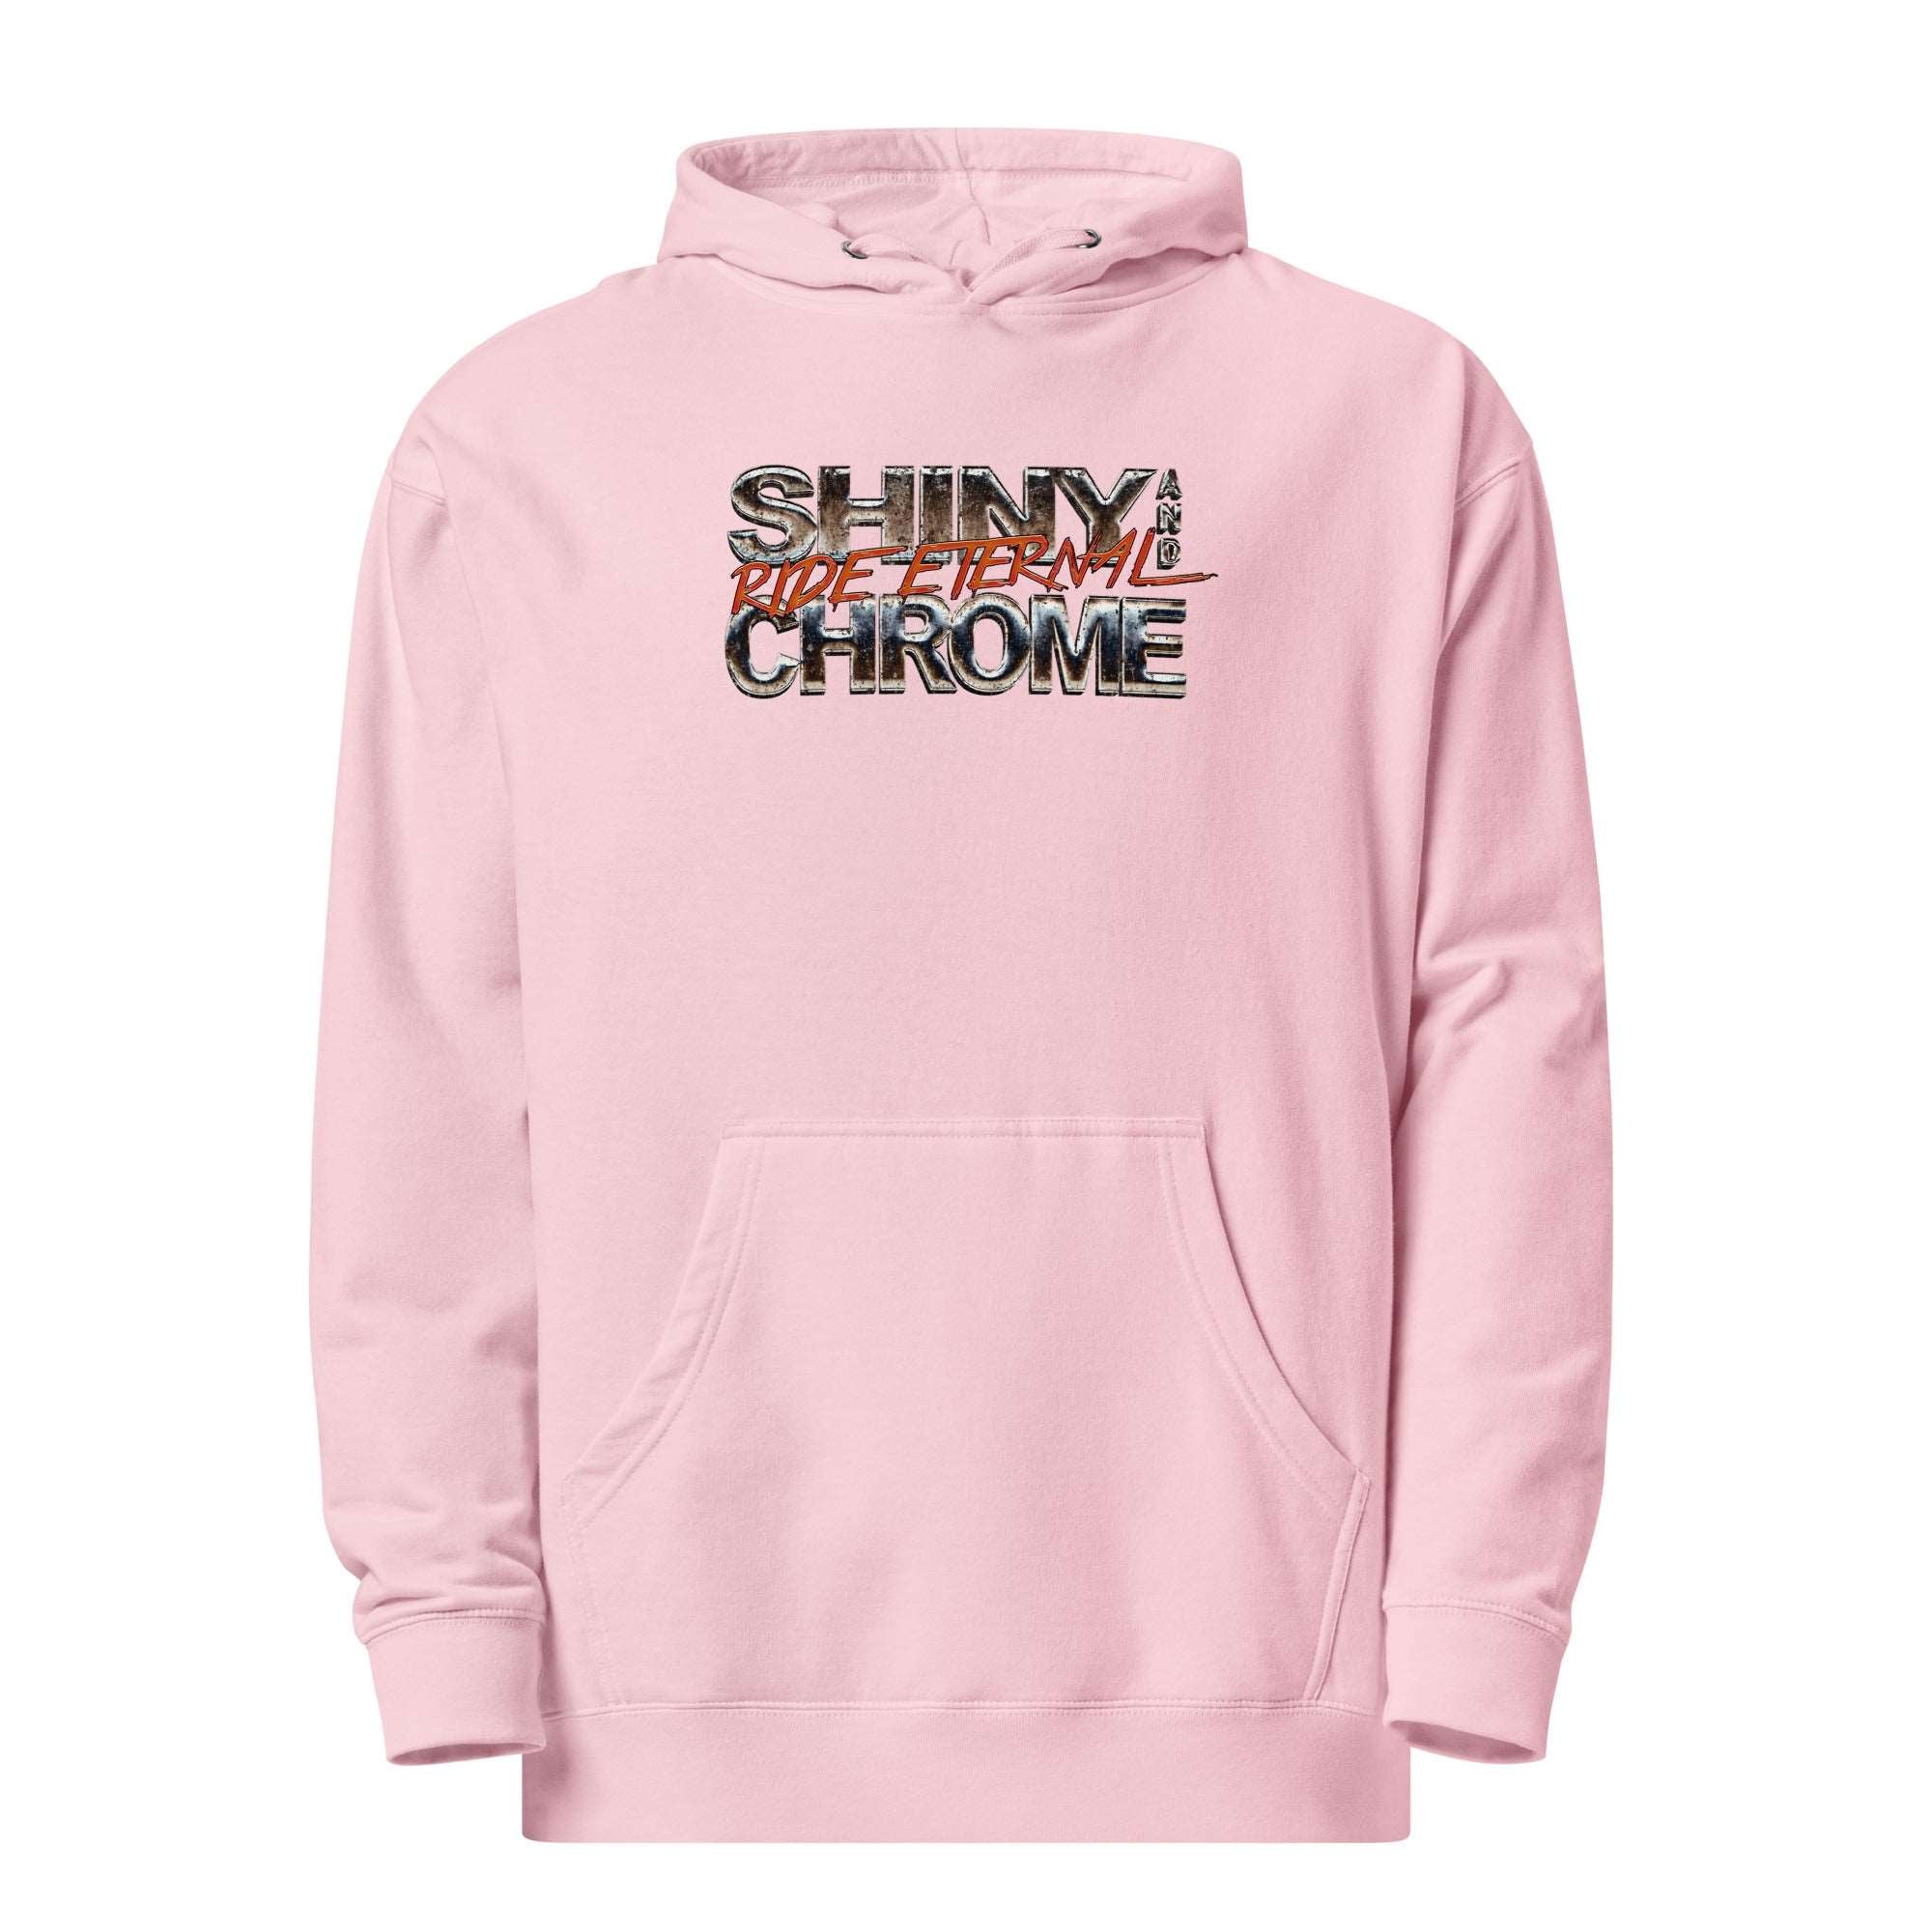 Shiny and Chrome Unisex midweight hoodie